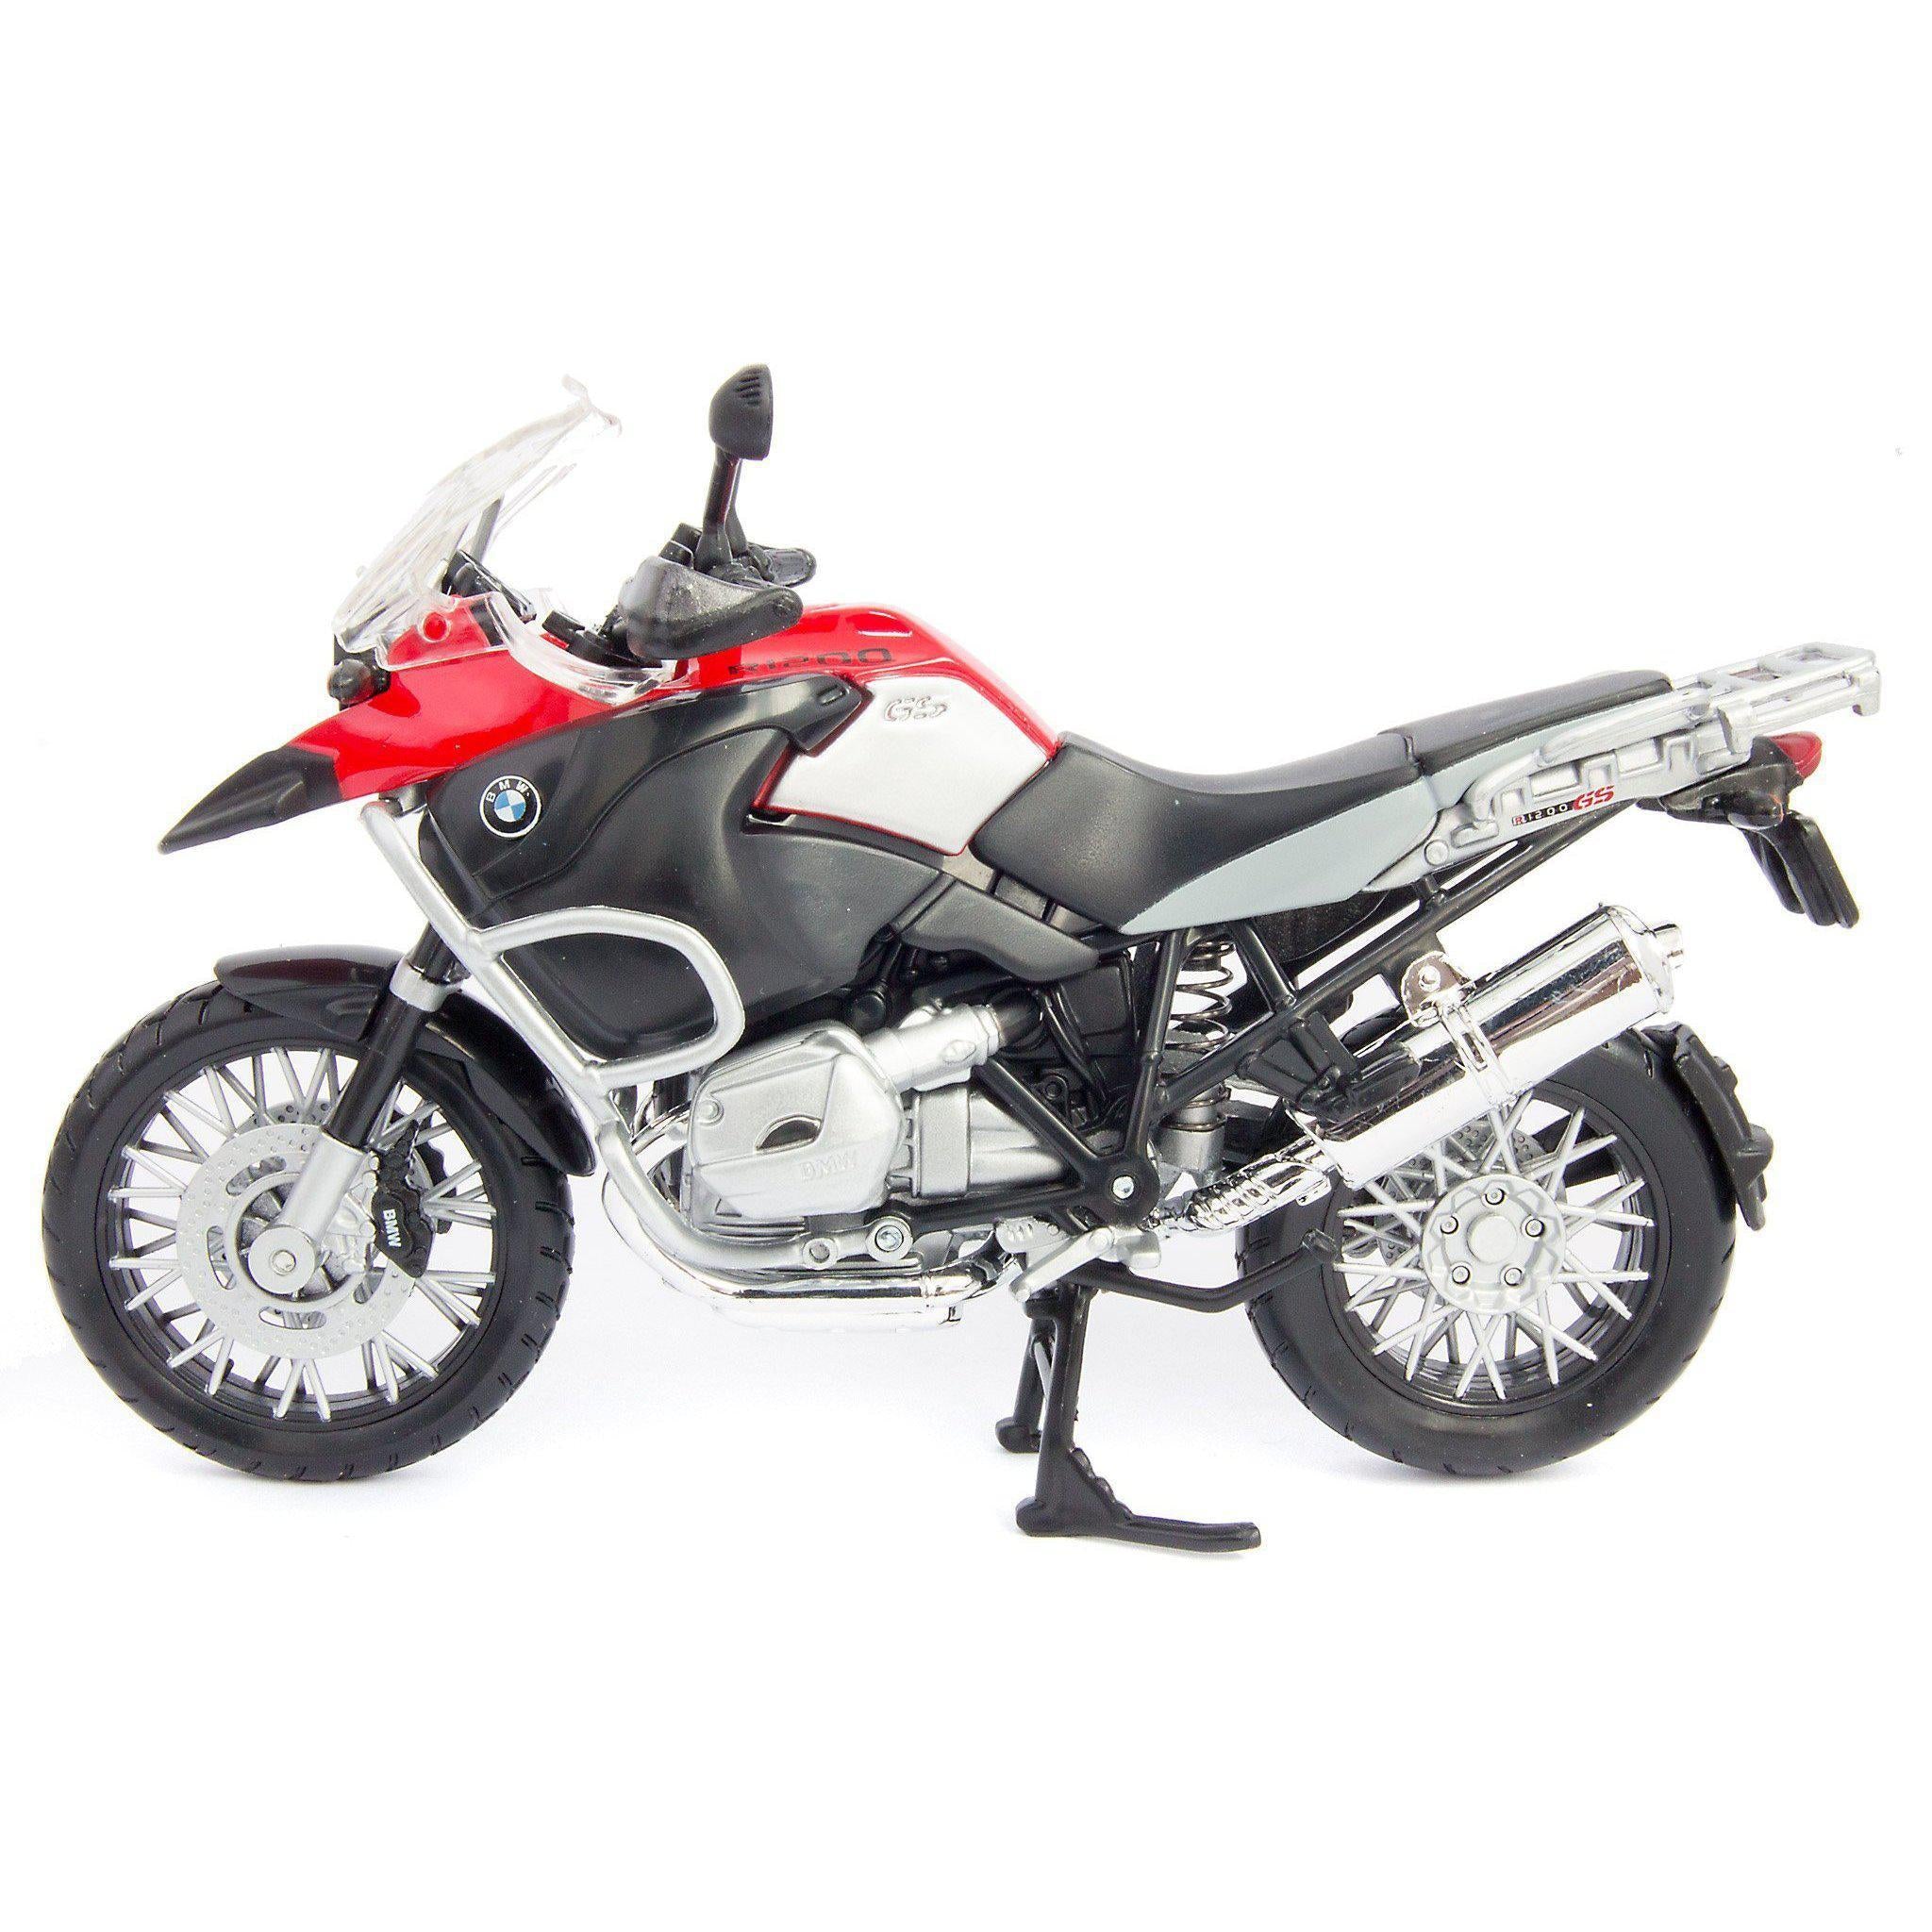 BMW R 1200 GS Diecast Model Motorcycle red 1:12 Scale